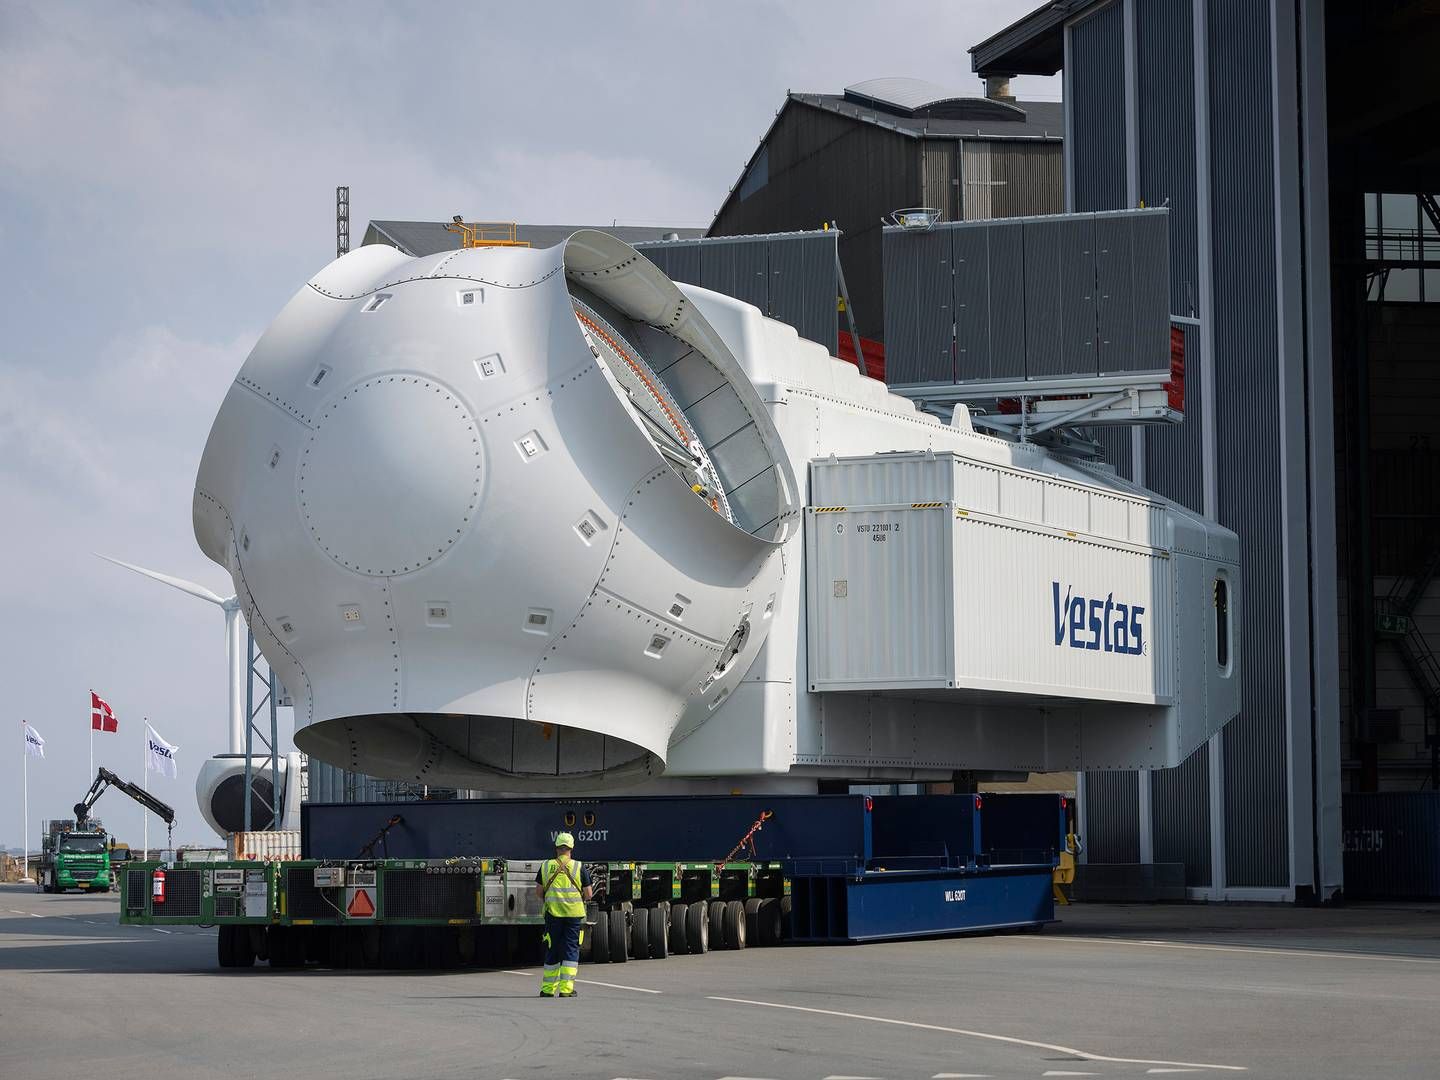 Vestas has primarily been known as a manufacturer of wind turbines - here, the upcoming V236 offshore wind turbine | Photo: vestas